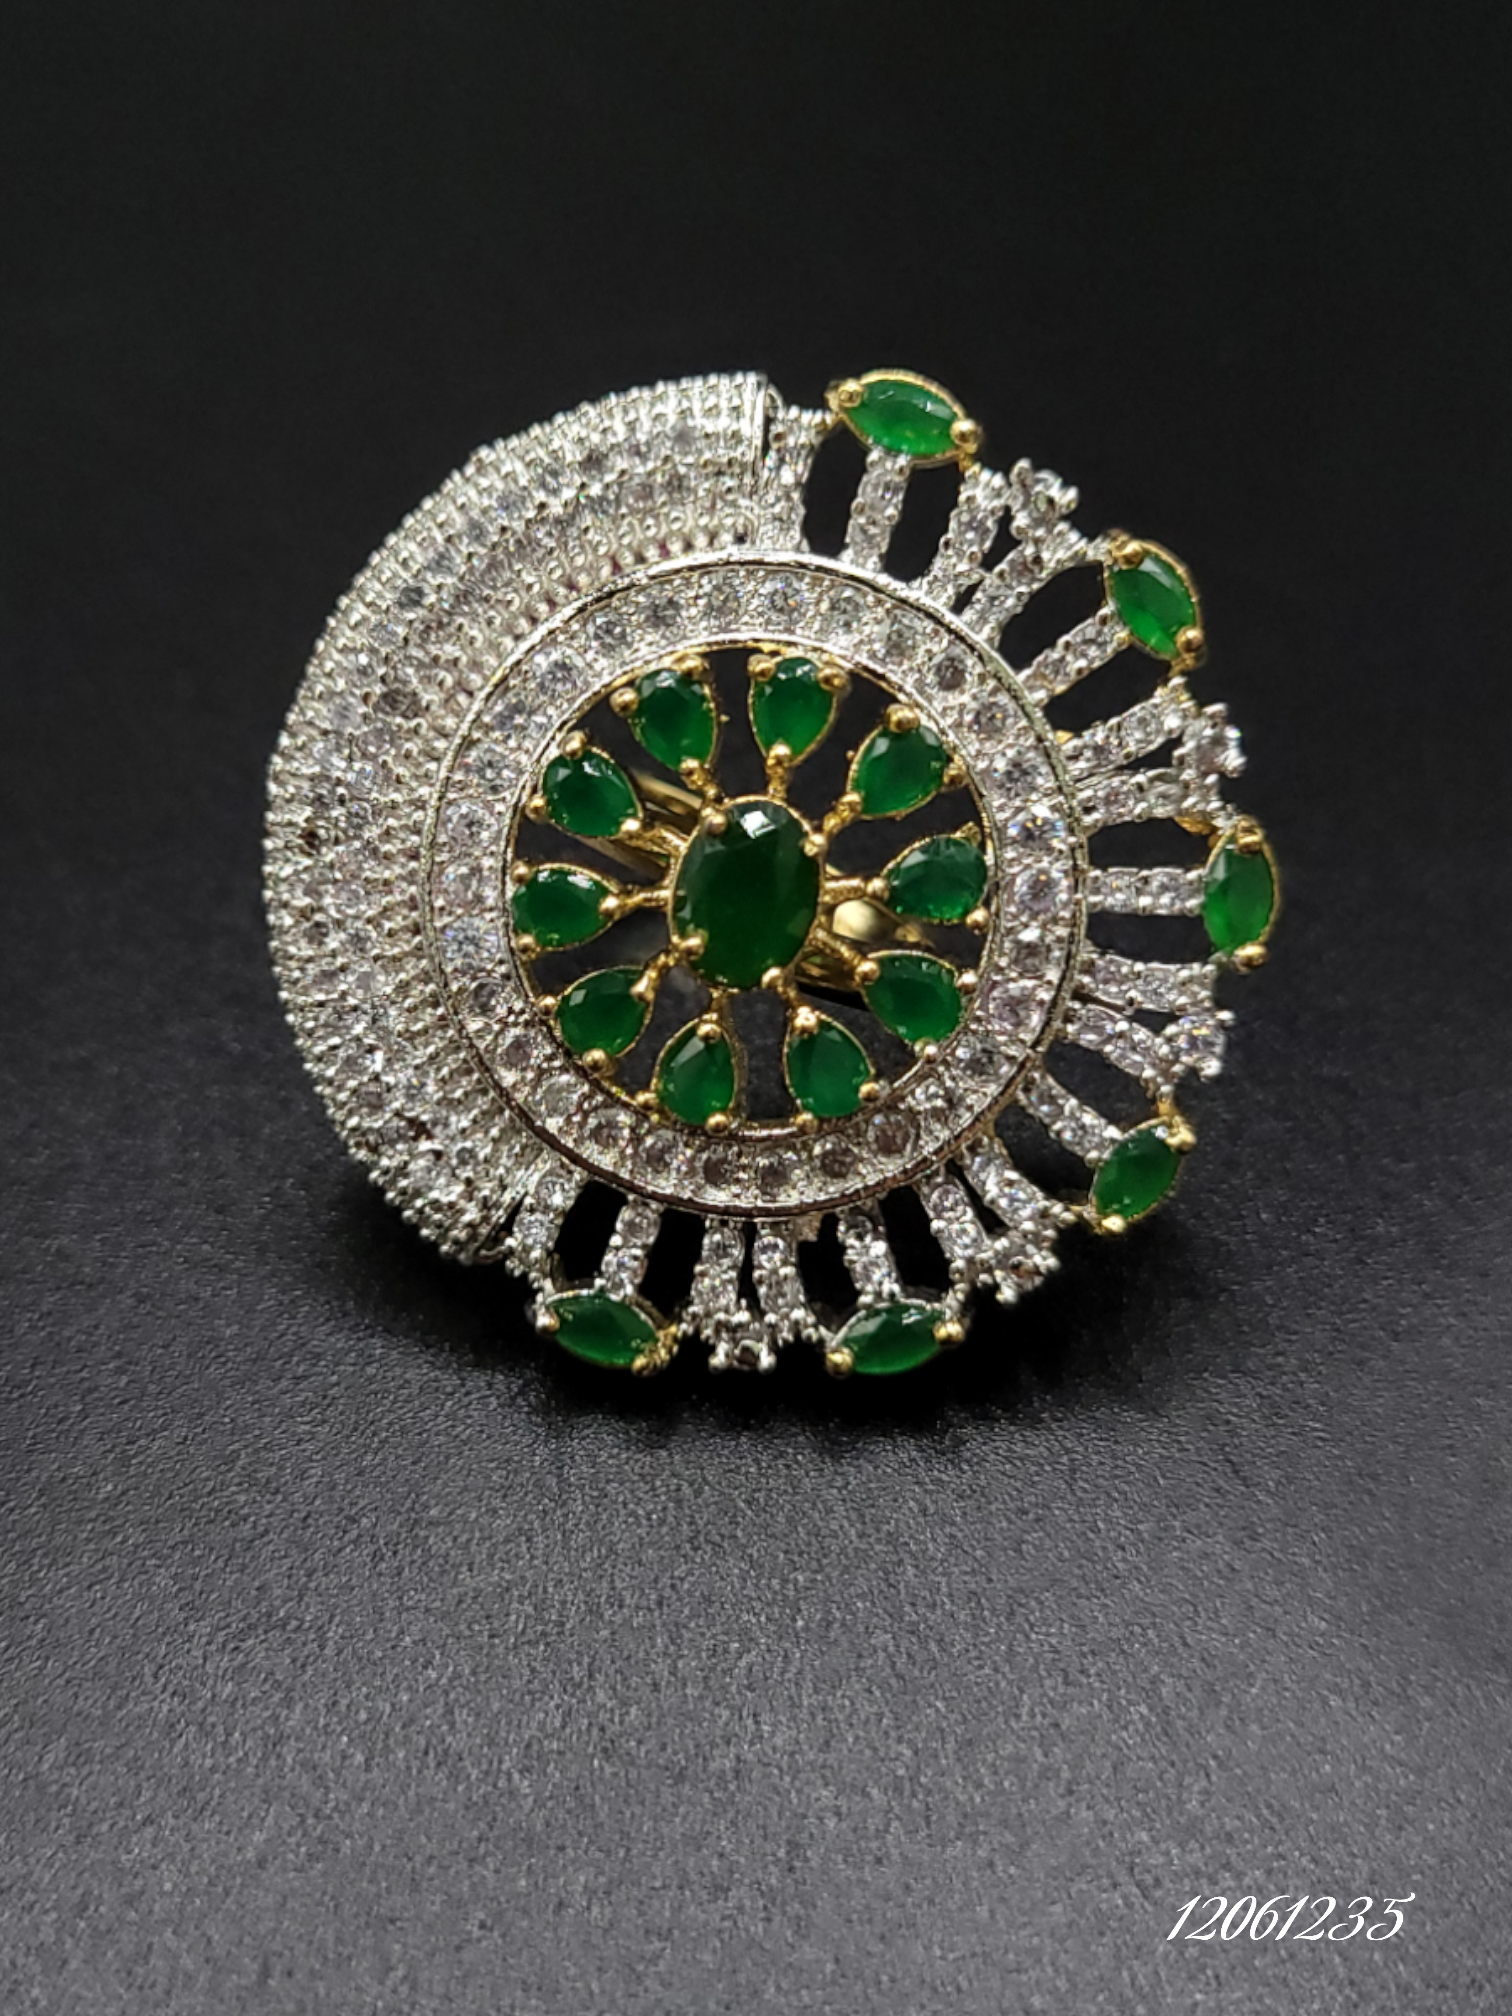 STUNNING GOLD DIAMOND RING WITH GREEN STONES